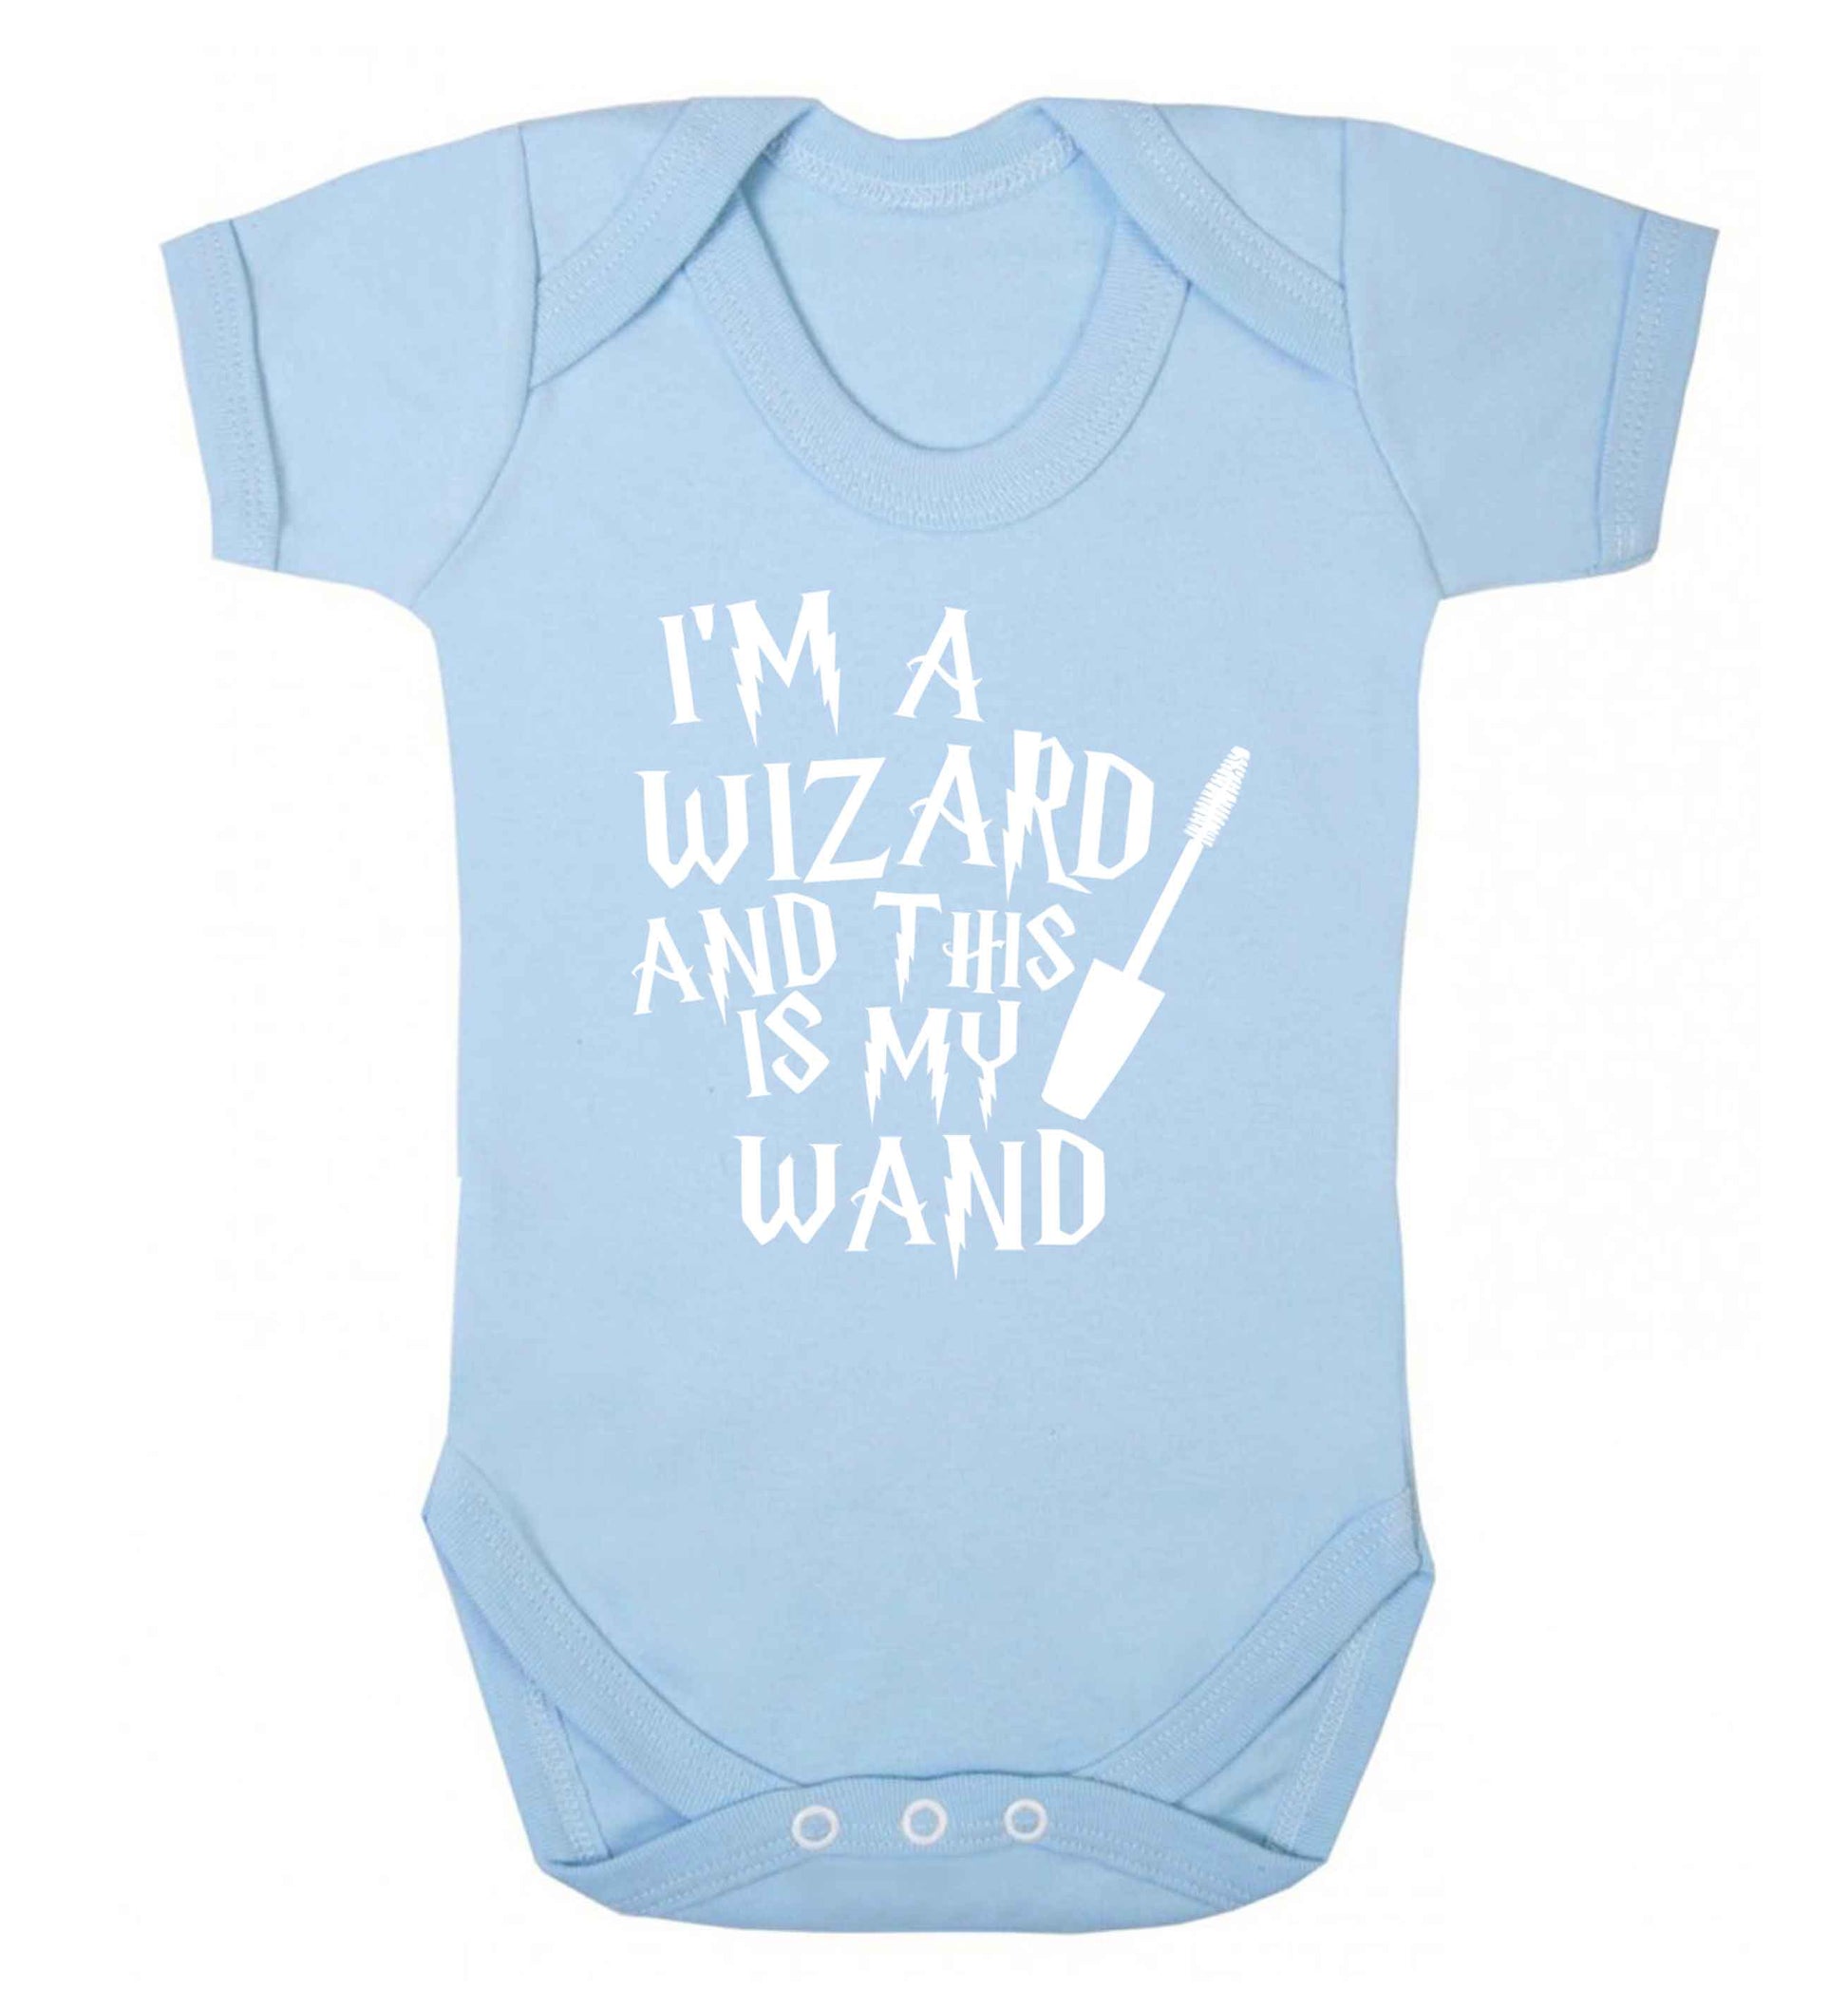 I'm a wizard and this is my wand Baby Vest pale blue 18-24 months